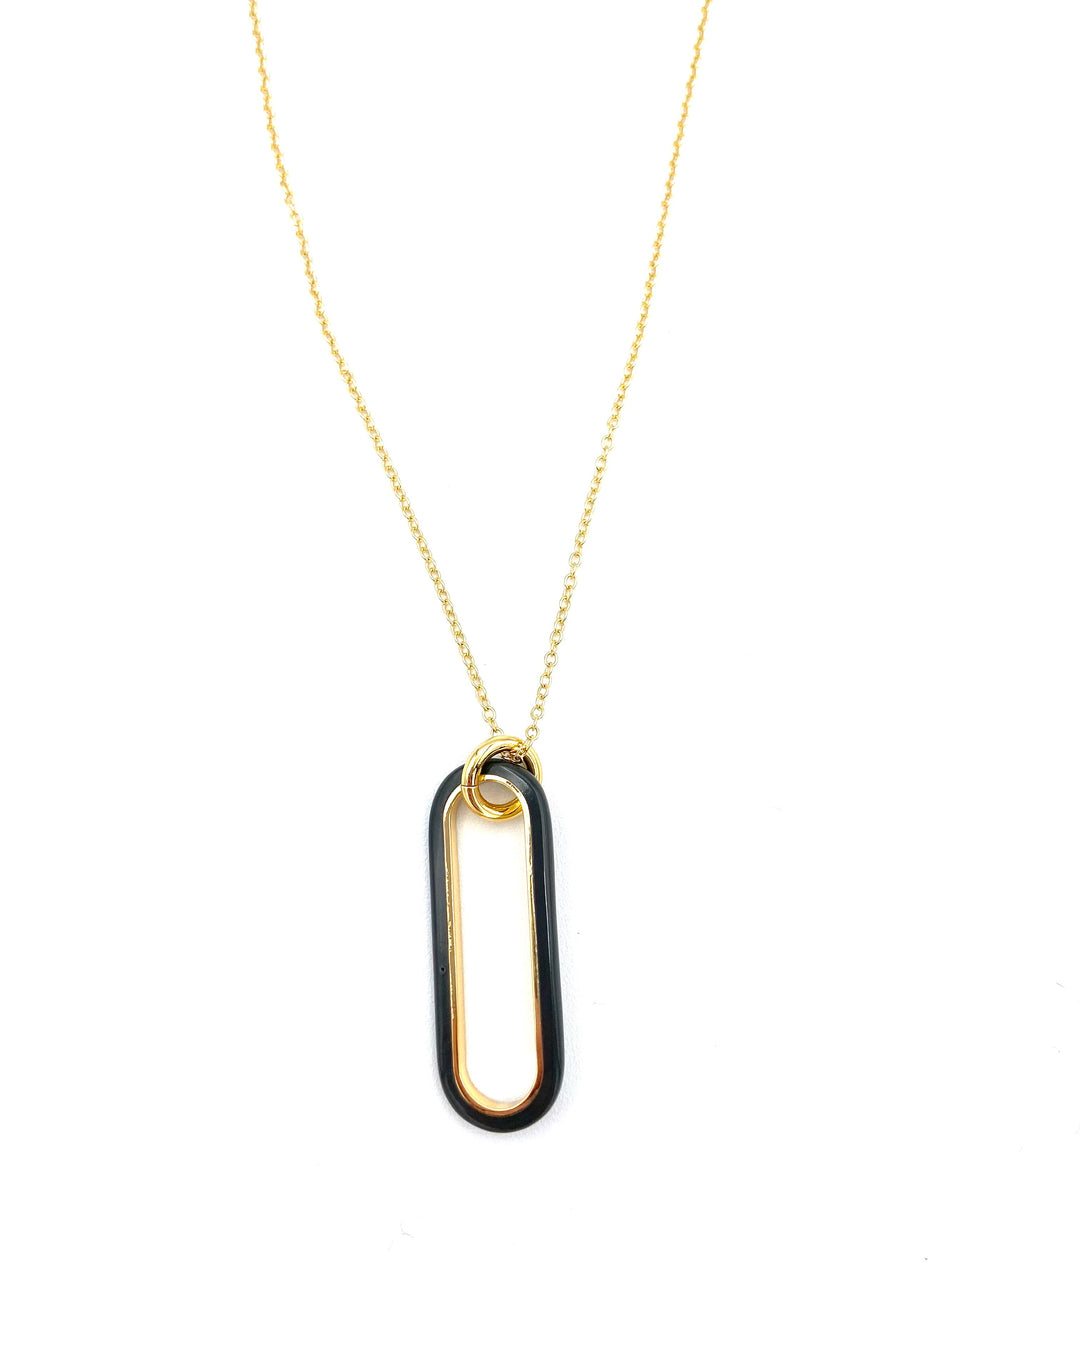 Gold Necklace With Black Oval Pendant